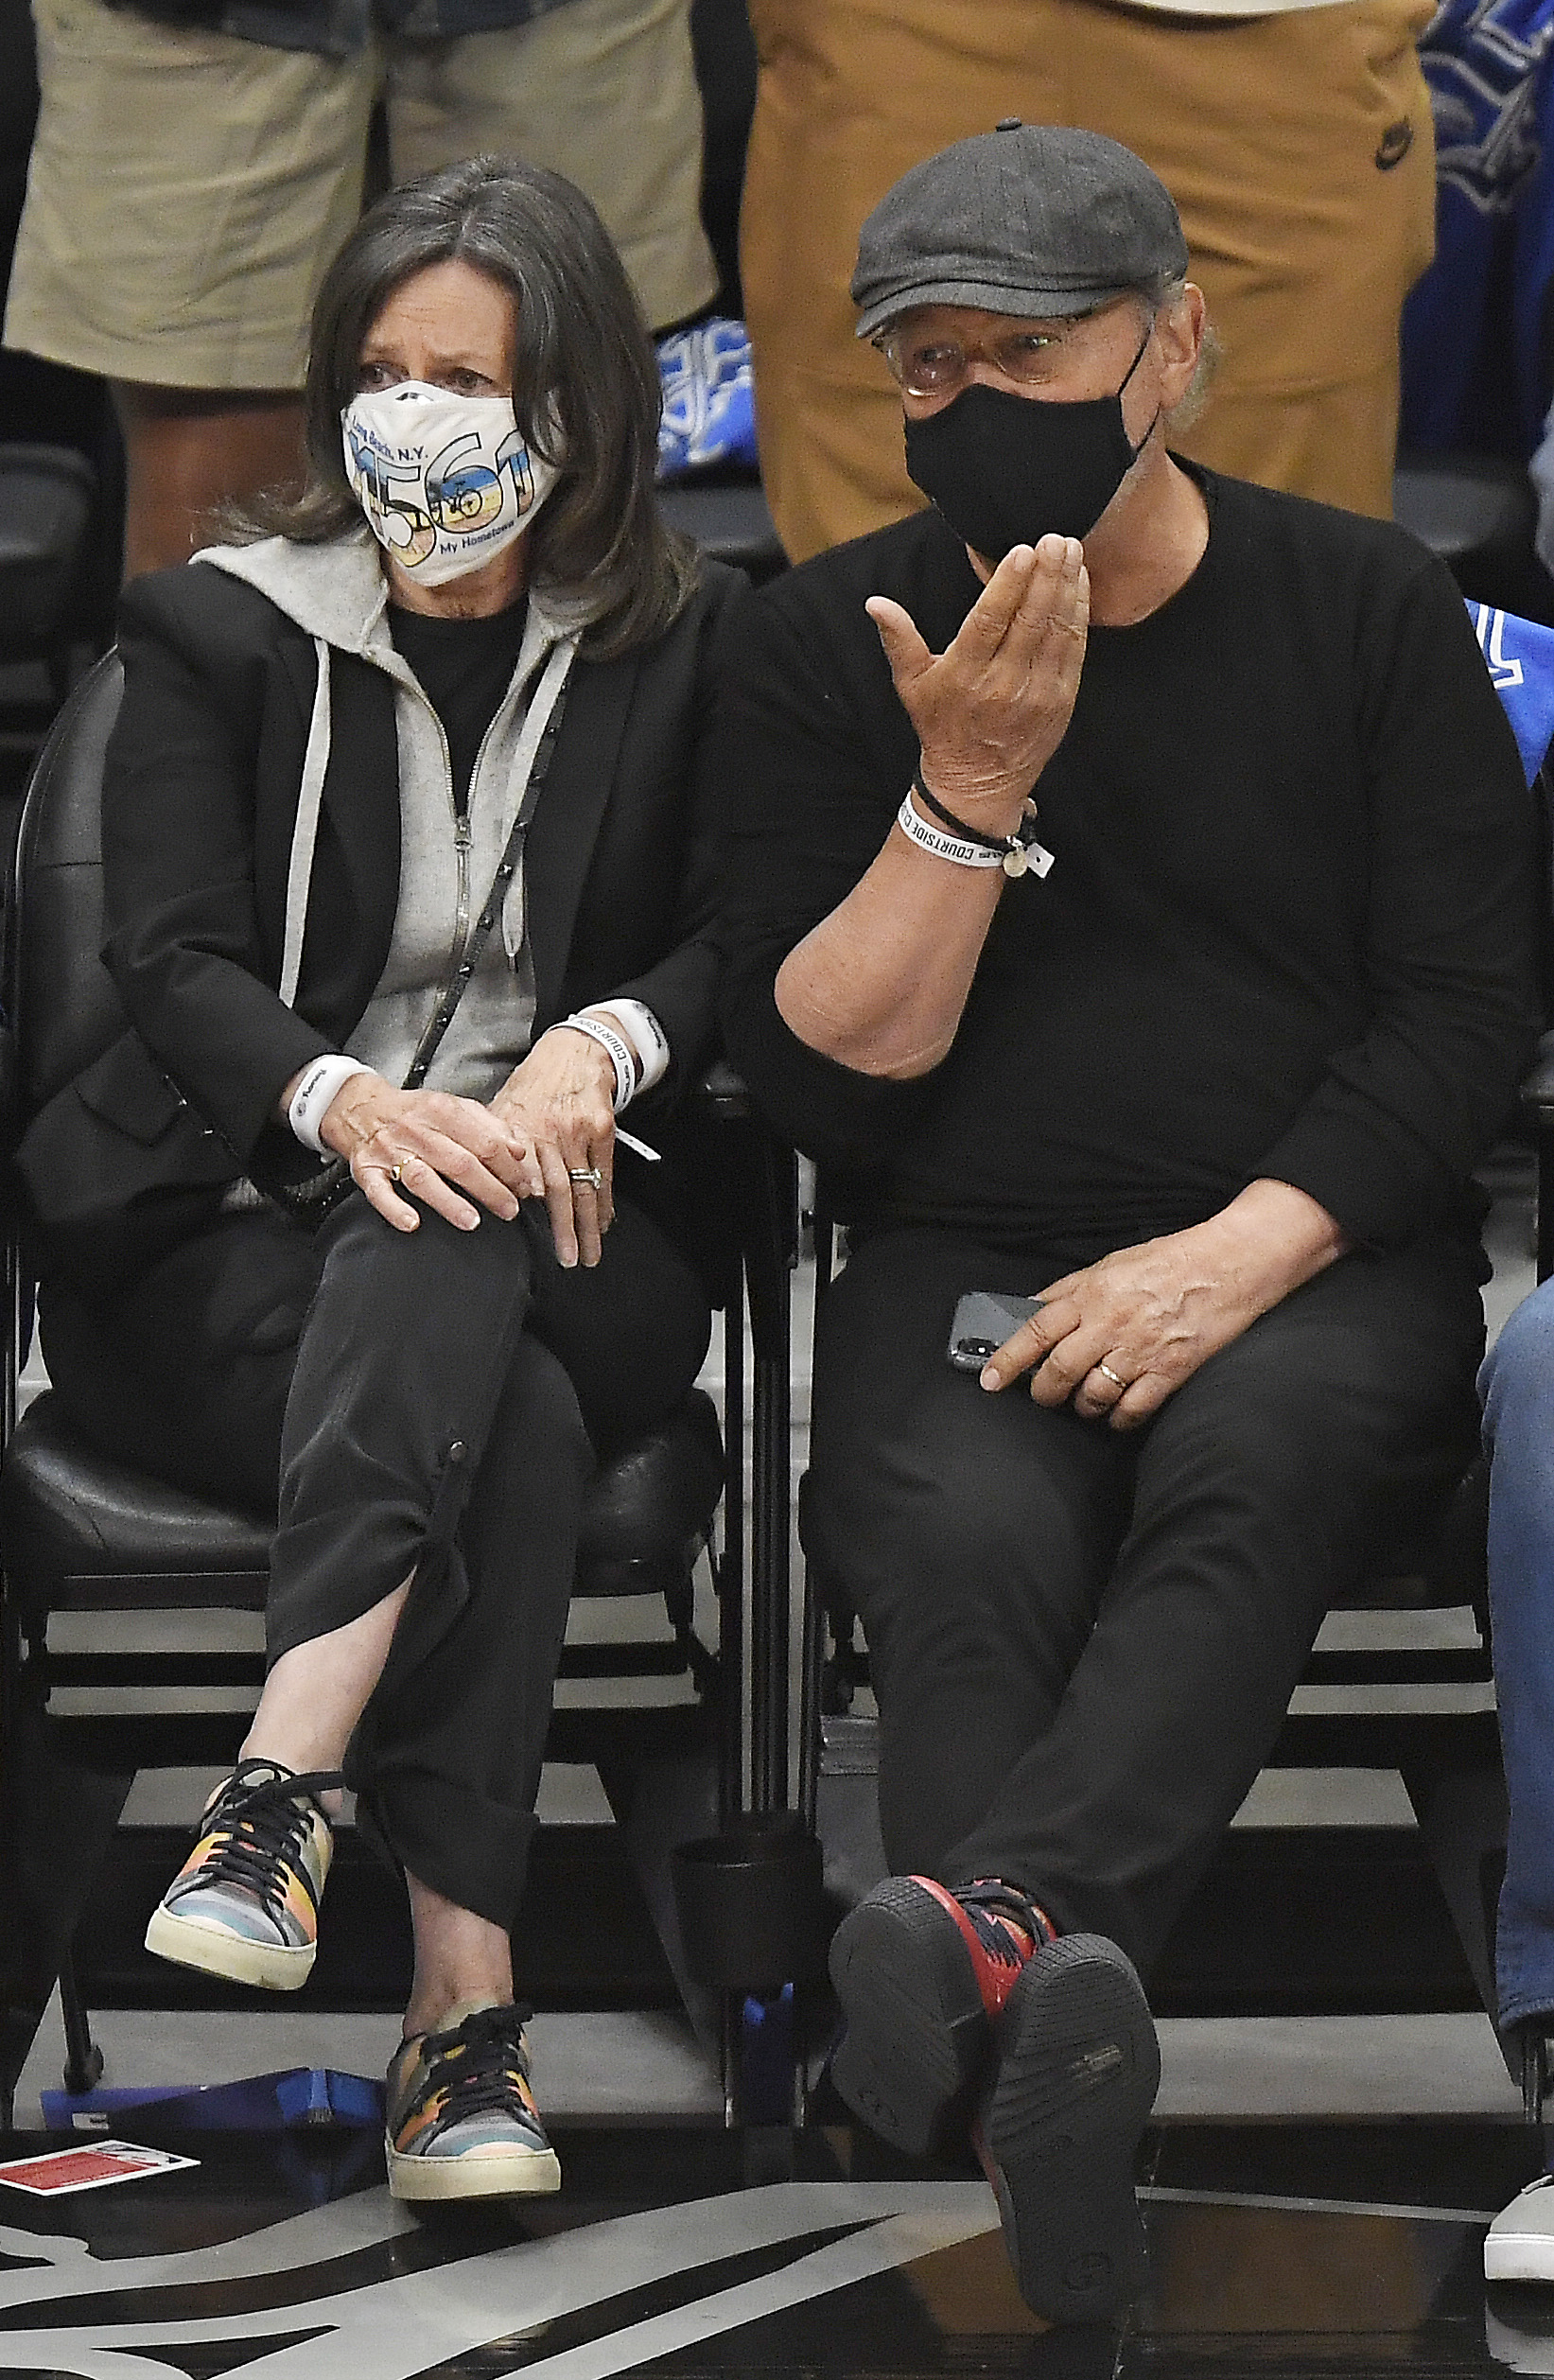 Billy and Janice Crystal at the Western Conference Finals between the Phoenix Suns and the LA Clippers at the Staples Center on June 26, 2021 in Los Angeles, California. | Source: Getty Images